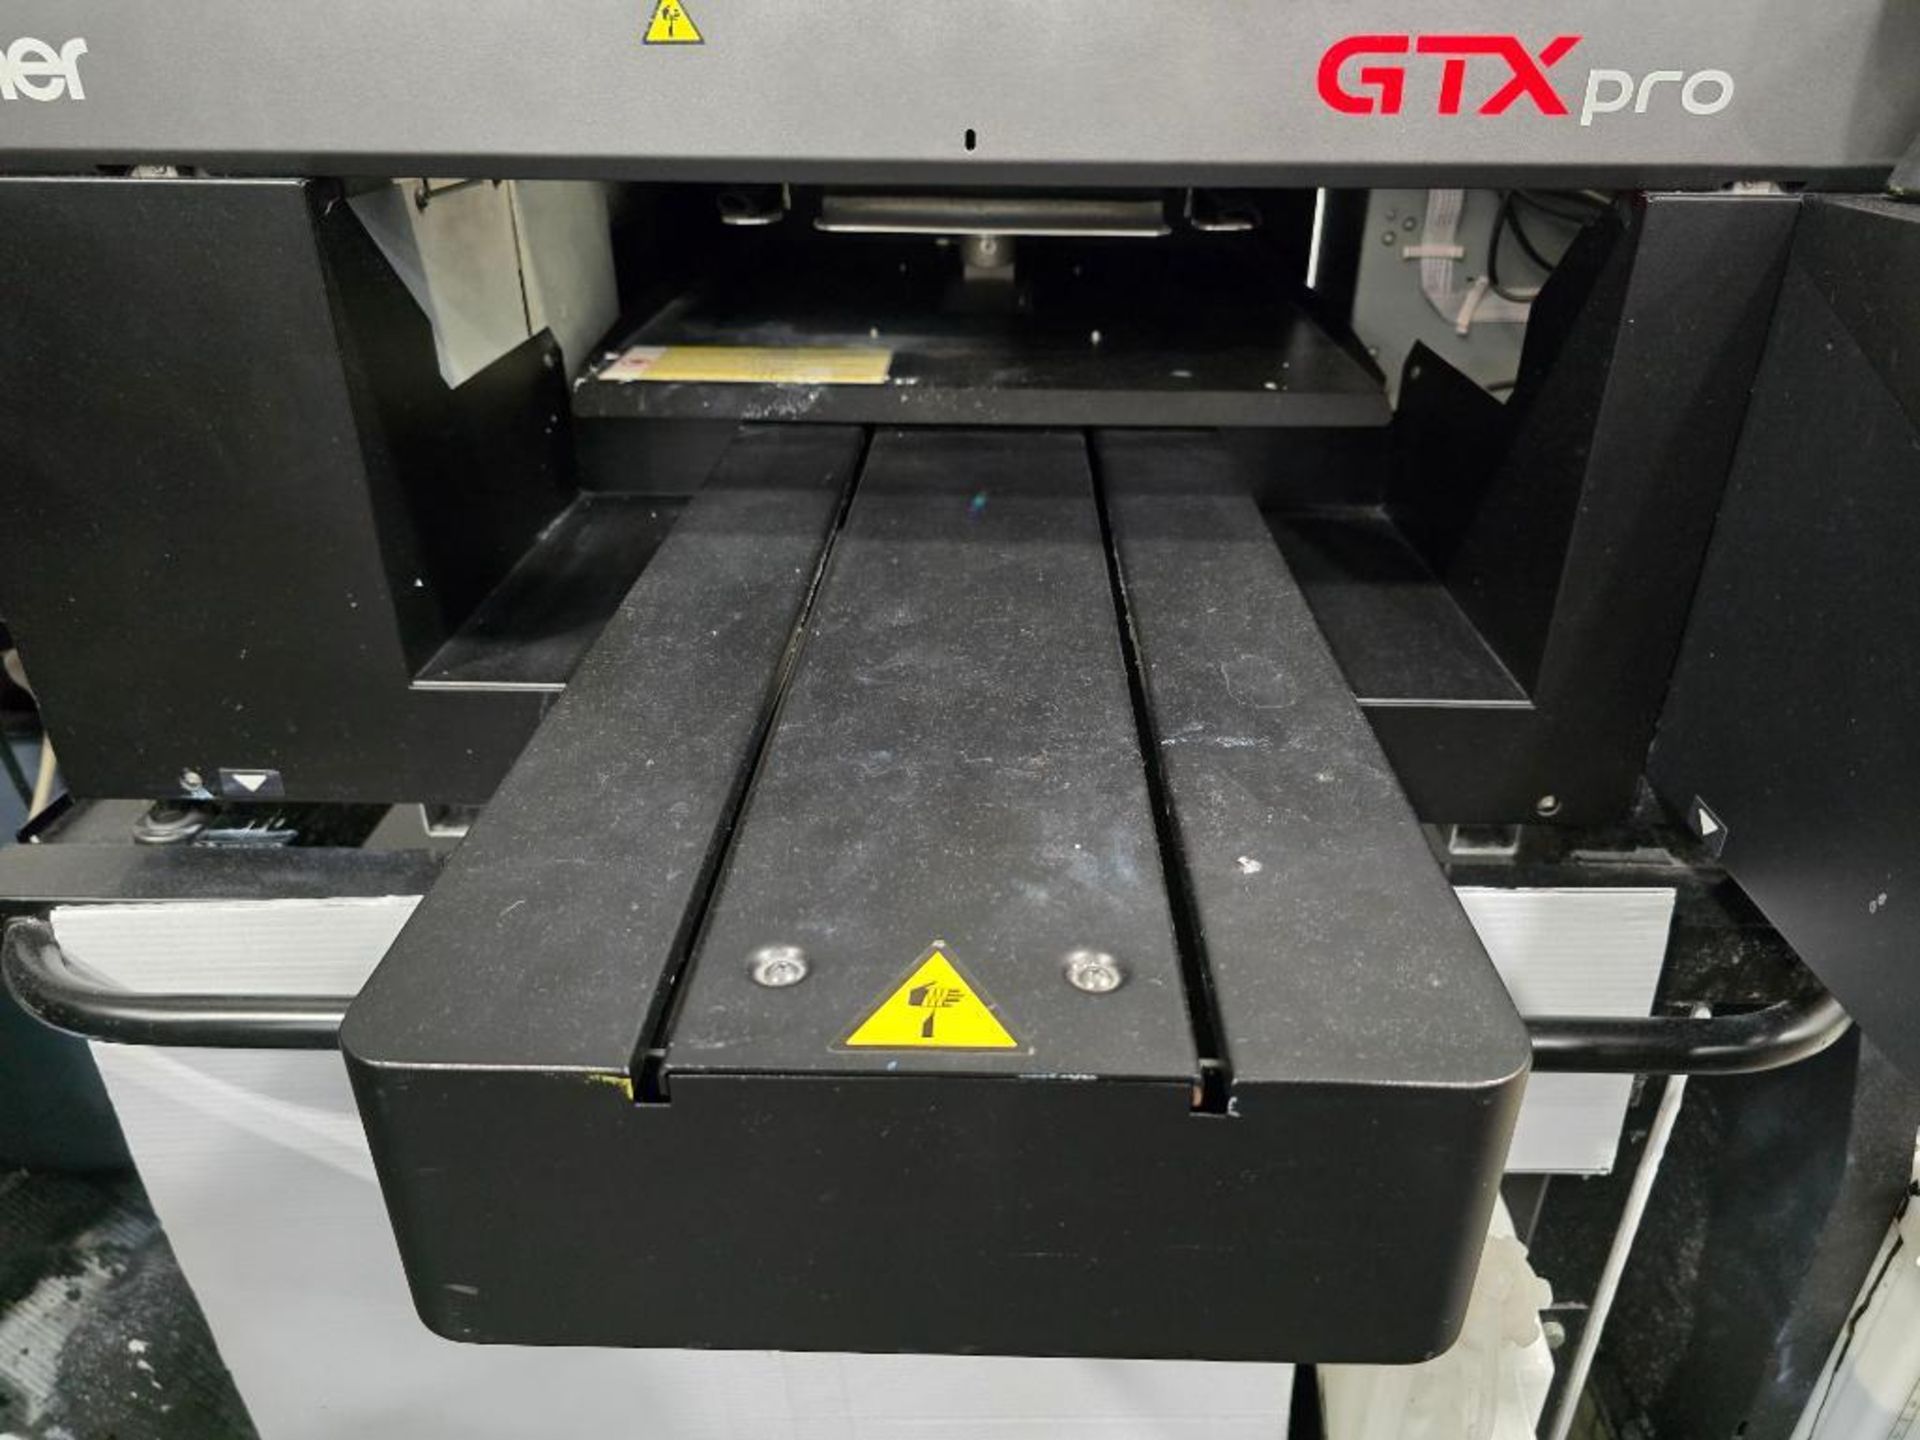 2022 Brother GTX-424 Pro-B DTG (Direct to Garment) Printer, Twin Head, 5-Color, Water Based Pigmente - Image 5 of 10